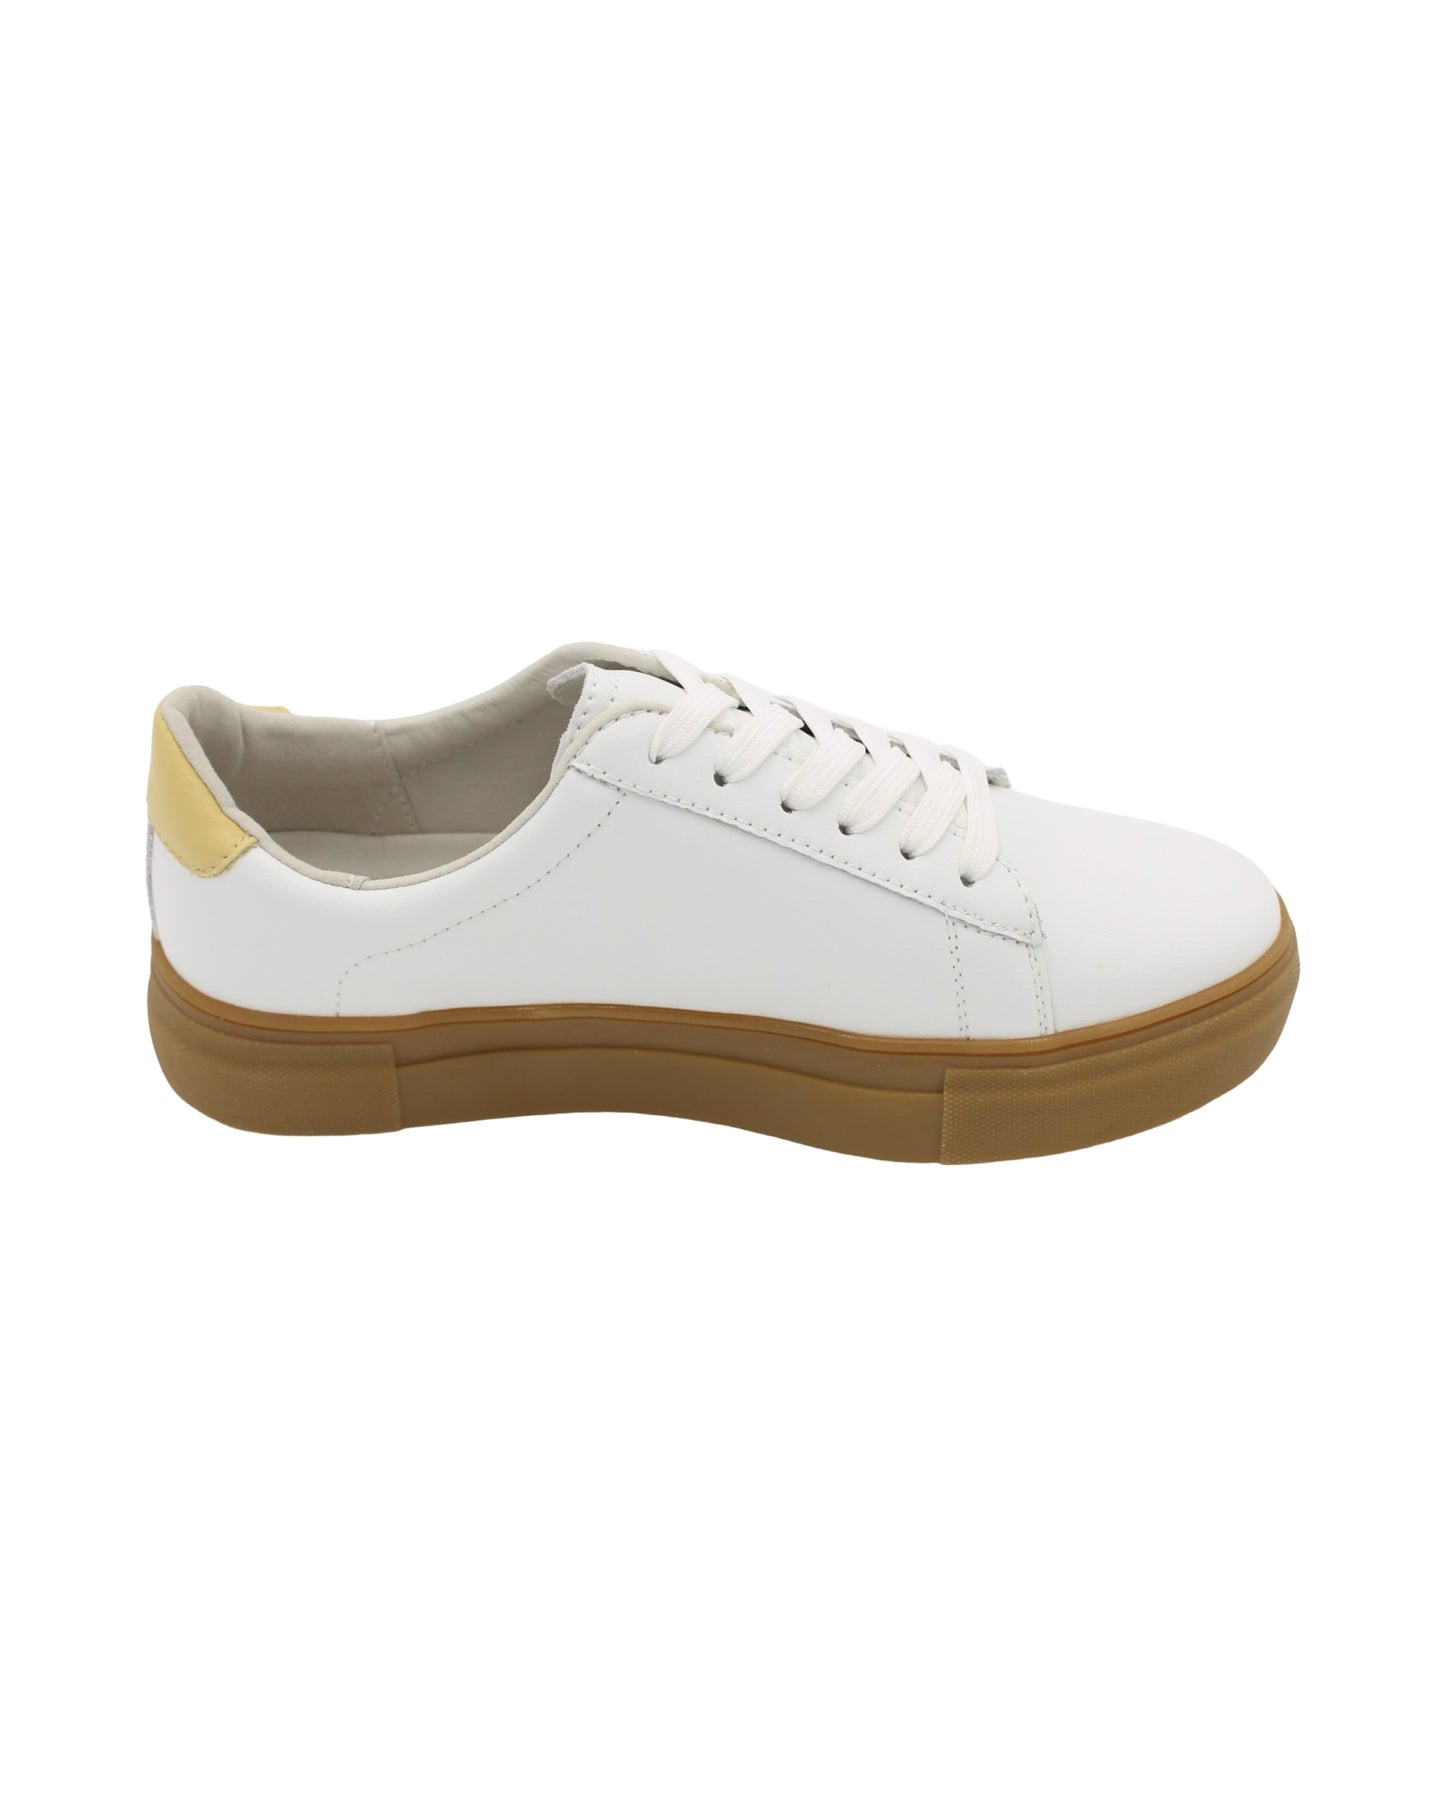 Drilleys - Ladies Shoes Trainers Off White (2440)